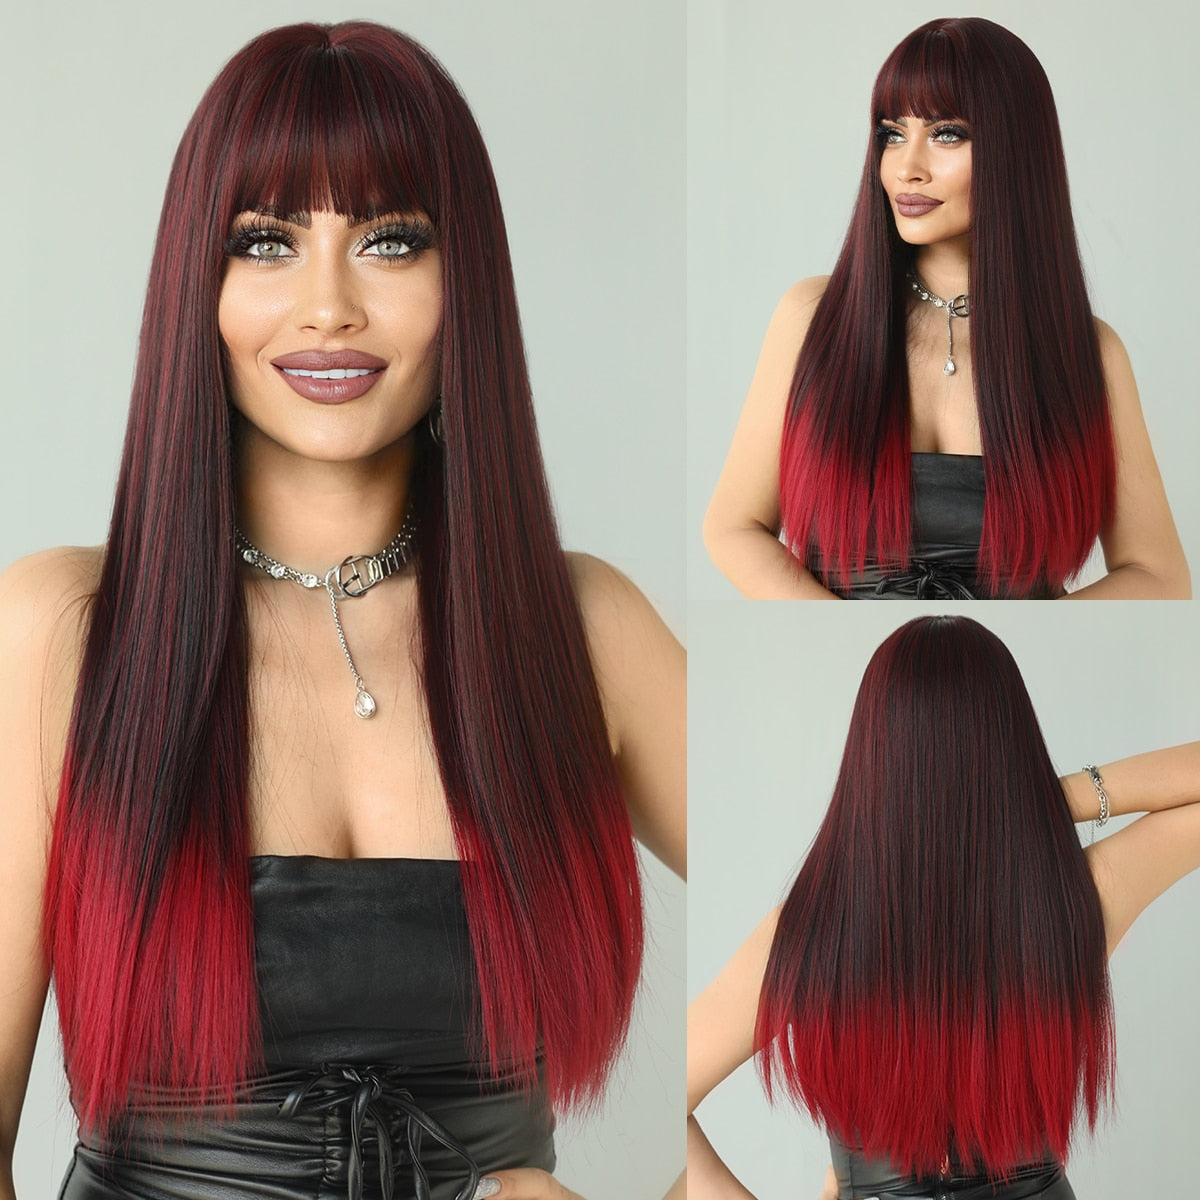 Cyber Monday Big Sales Halloween Cosplay Wig With Bang Synthetic Wigs For Women Heat Resistant Natural Hair Long Straight Ombre Wine Red Wigs